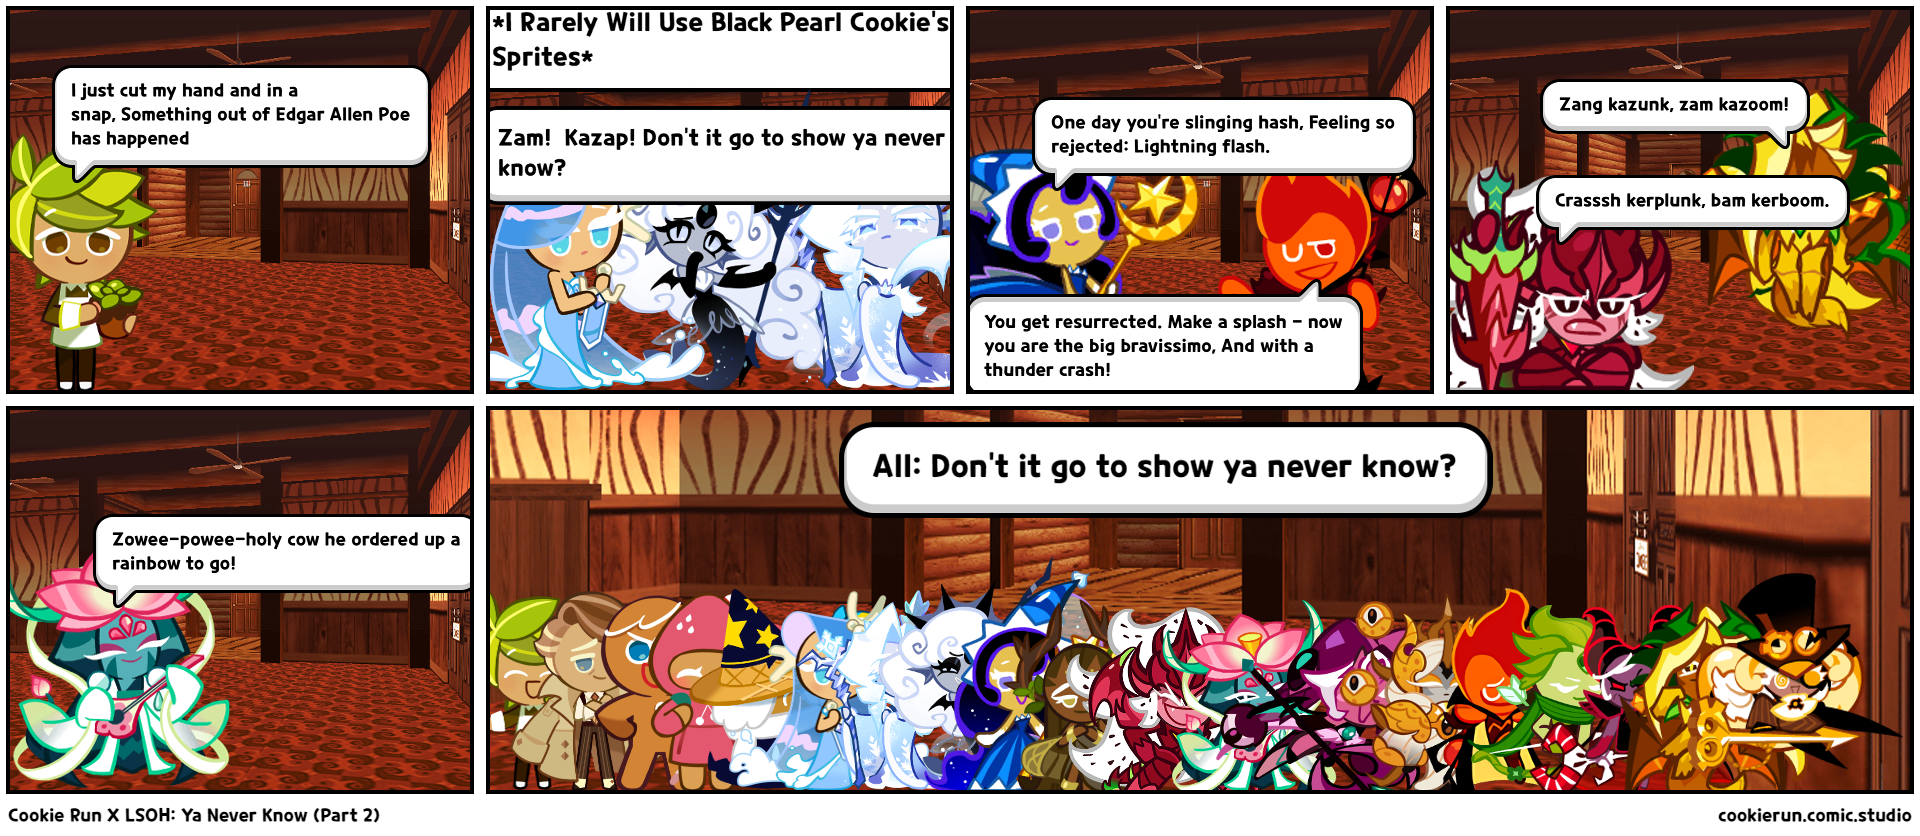 A hat in time part 2 - Comic Studio